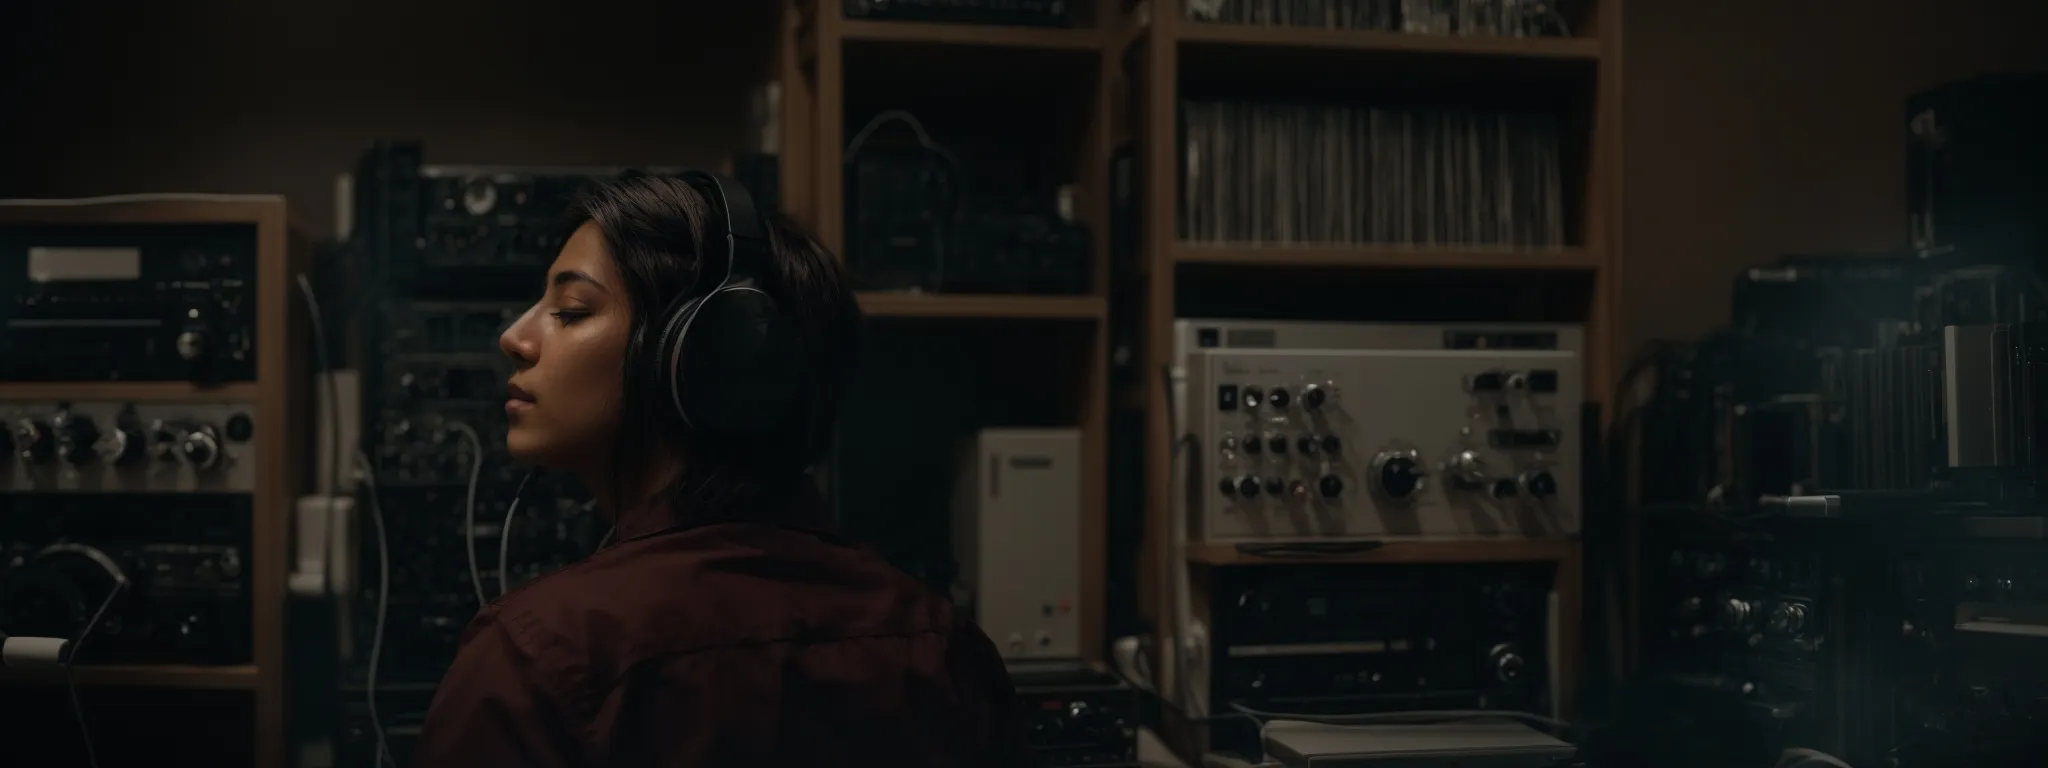 a researcher attentively listens through headphones to the output of a high-tech sound synthesizer contrasted by a dusty reel-to-reel tape player, capturing the evolution from past to present in voice replication technology.